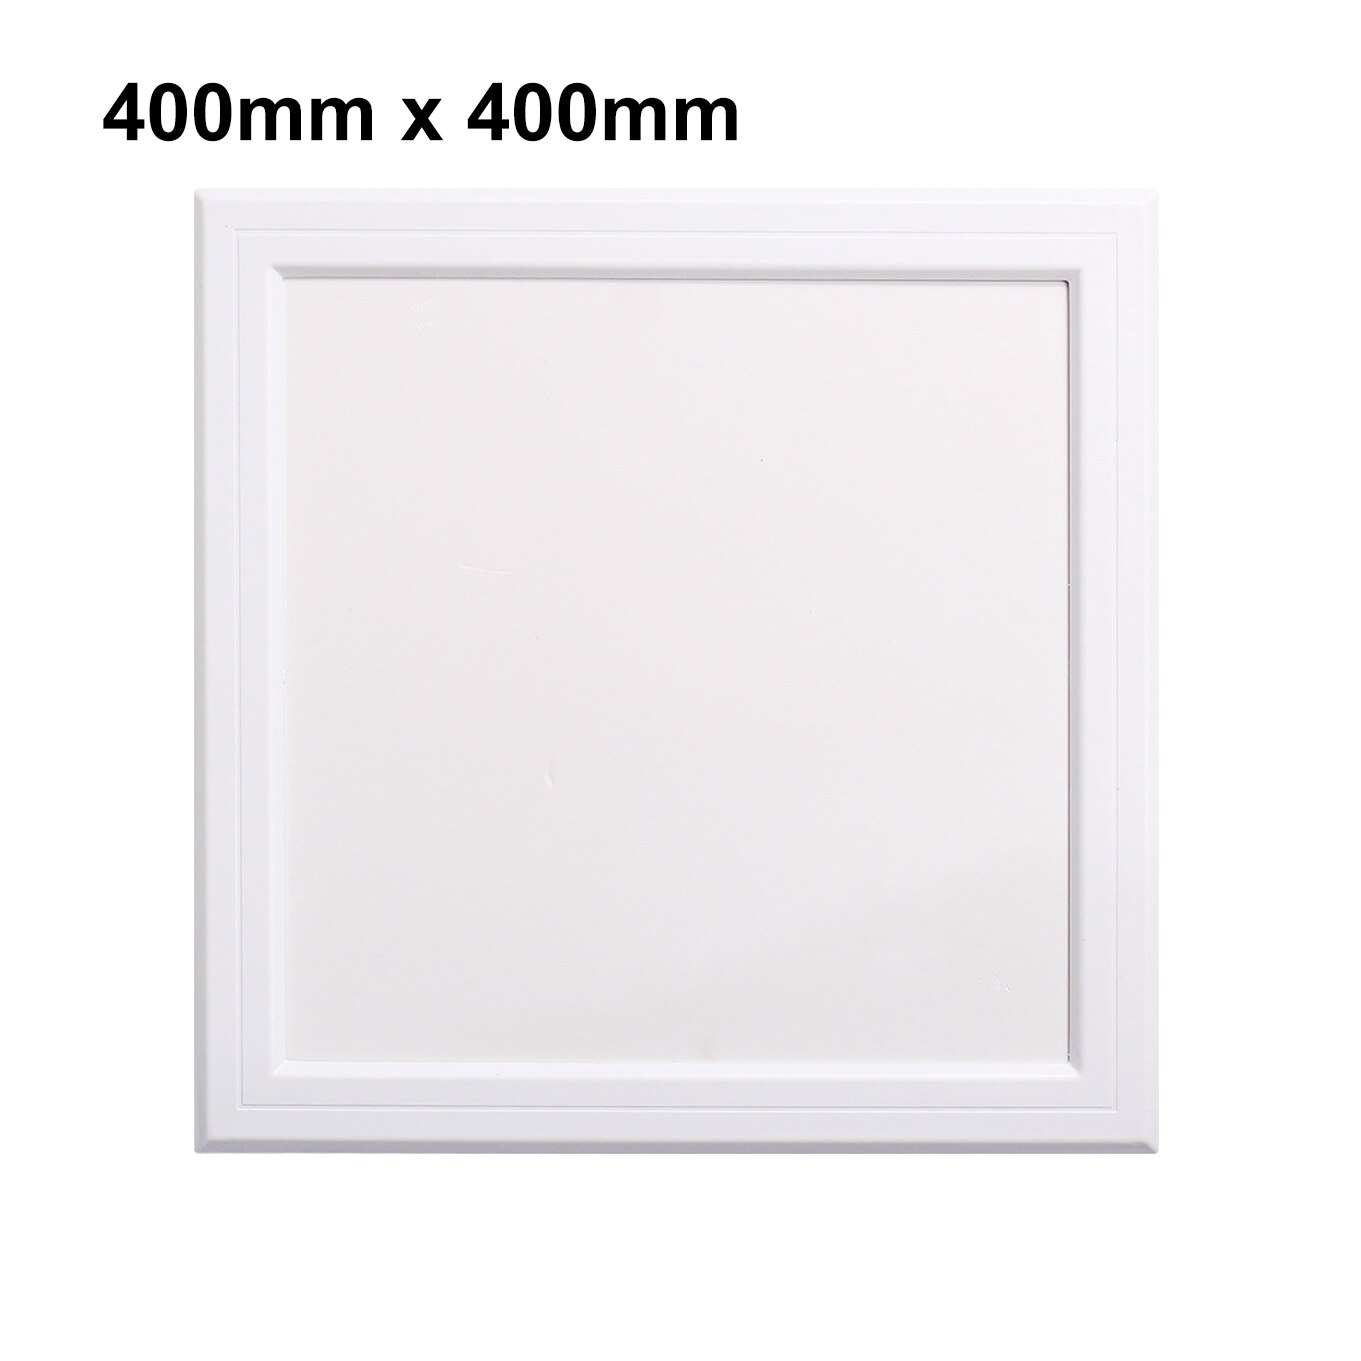 400x400mm Wall Ceiling Access Panel ABS White Inspection Plumbing Wiring Door Revision Hatch Cover: Default Title